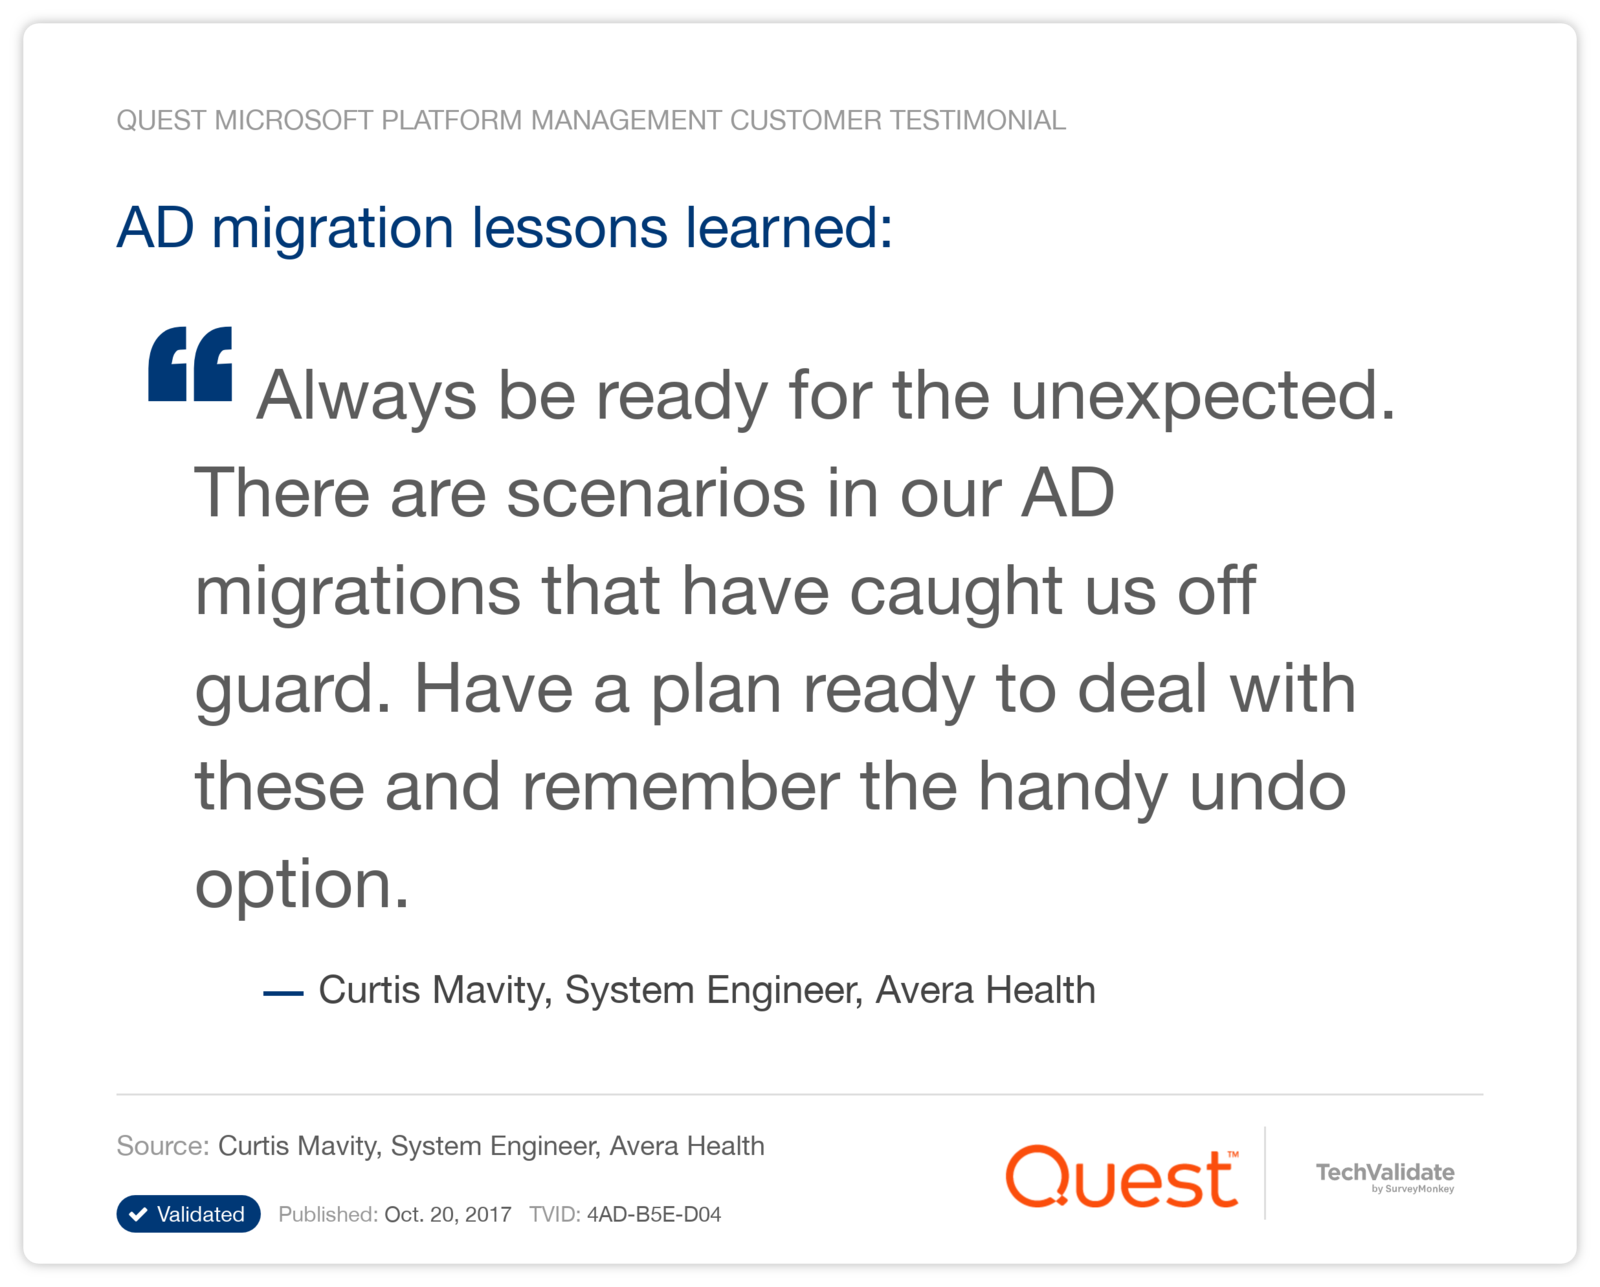 AD migration lessons learned: